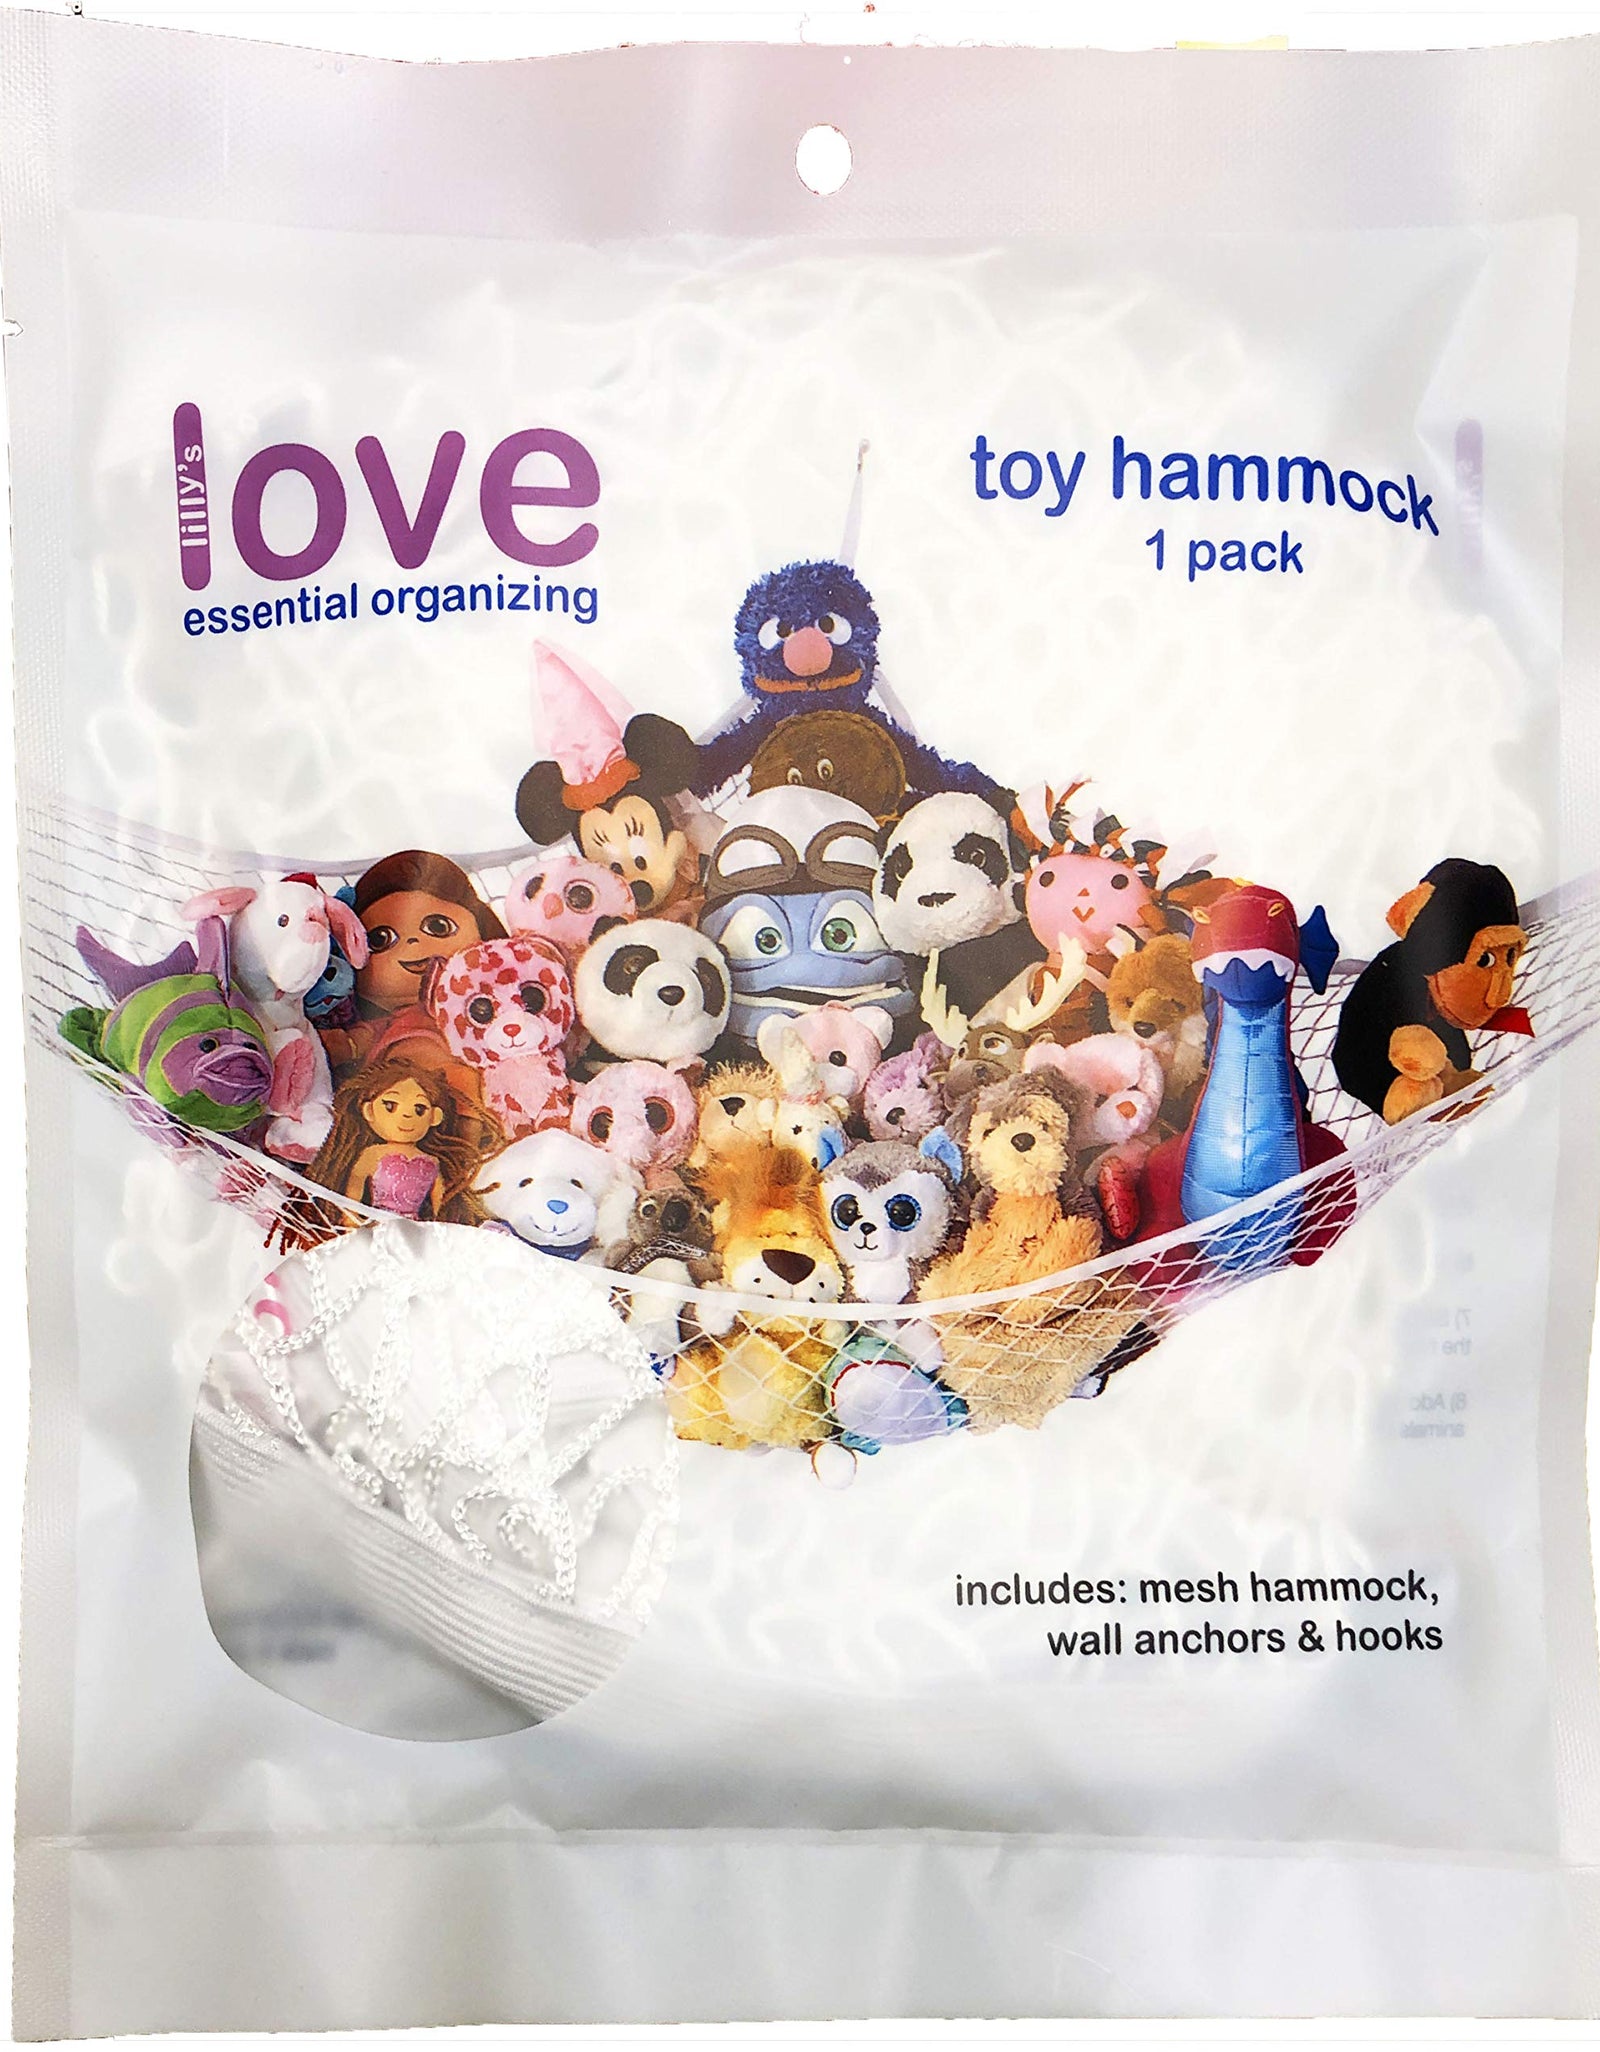 Lilly's Love Stuffed Animal Storage Hammock - Large "STUFFIE Party Hammock" - Organize Stuffed Animals and Children's Toys with this Stuffed Animal Net